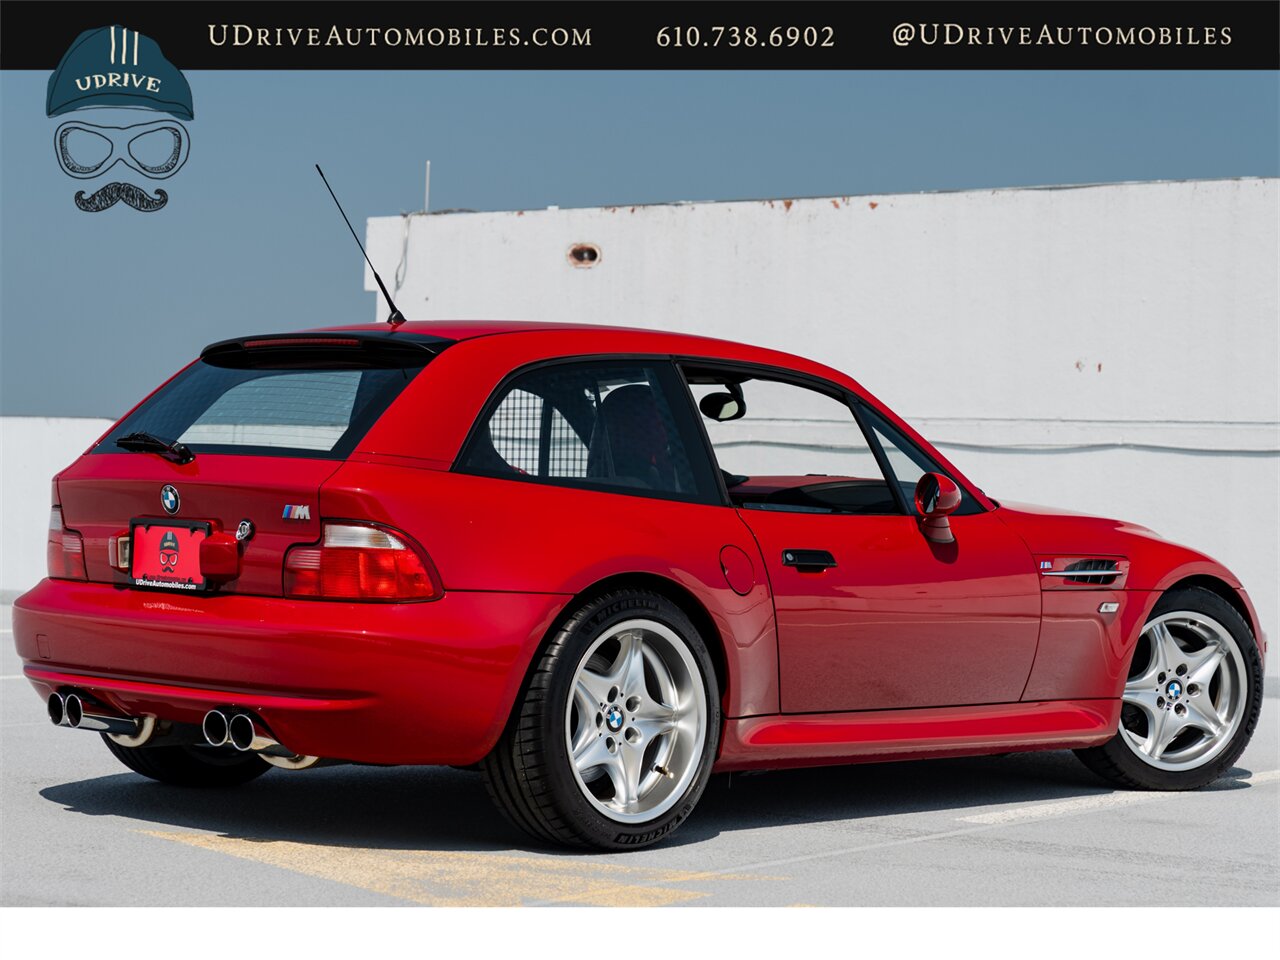 2000 BMW Z3 M  Coupe 25k Miles  Sunroof Delete $4k Recent Service - Photo 2 - West Chester, PA 19382